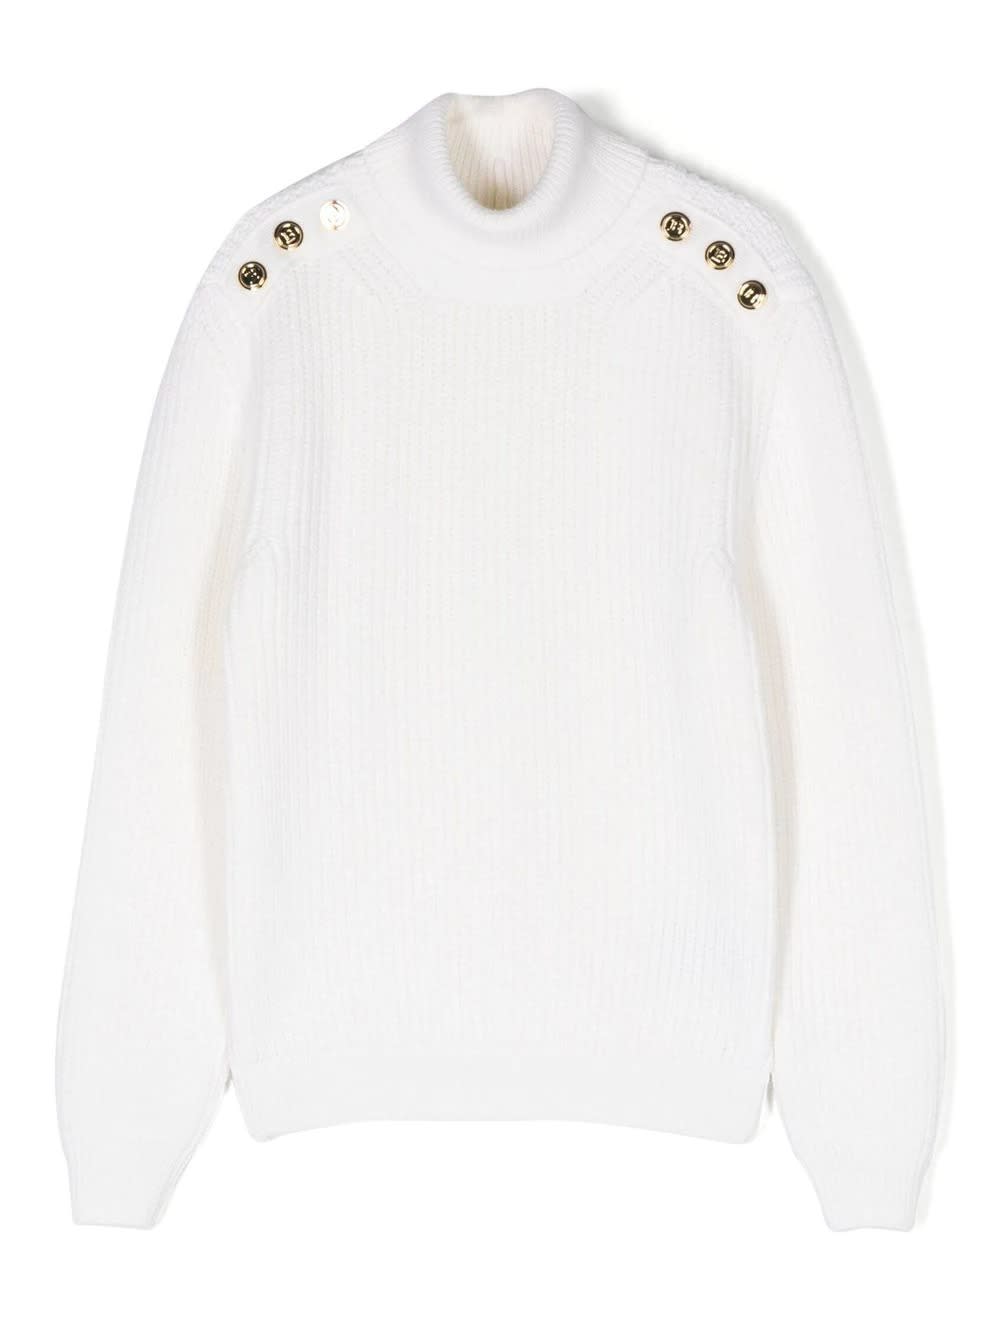 Balmain Kids White Ribbed High Collar Sweater With Gold Embossed Buttons